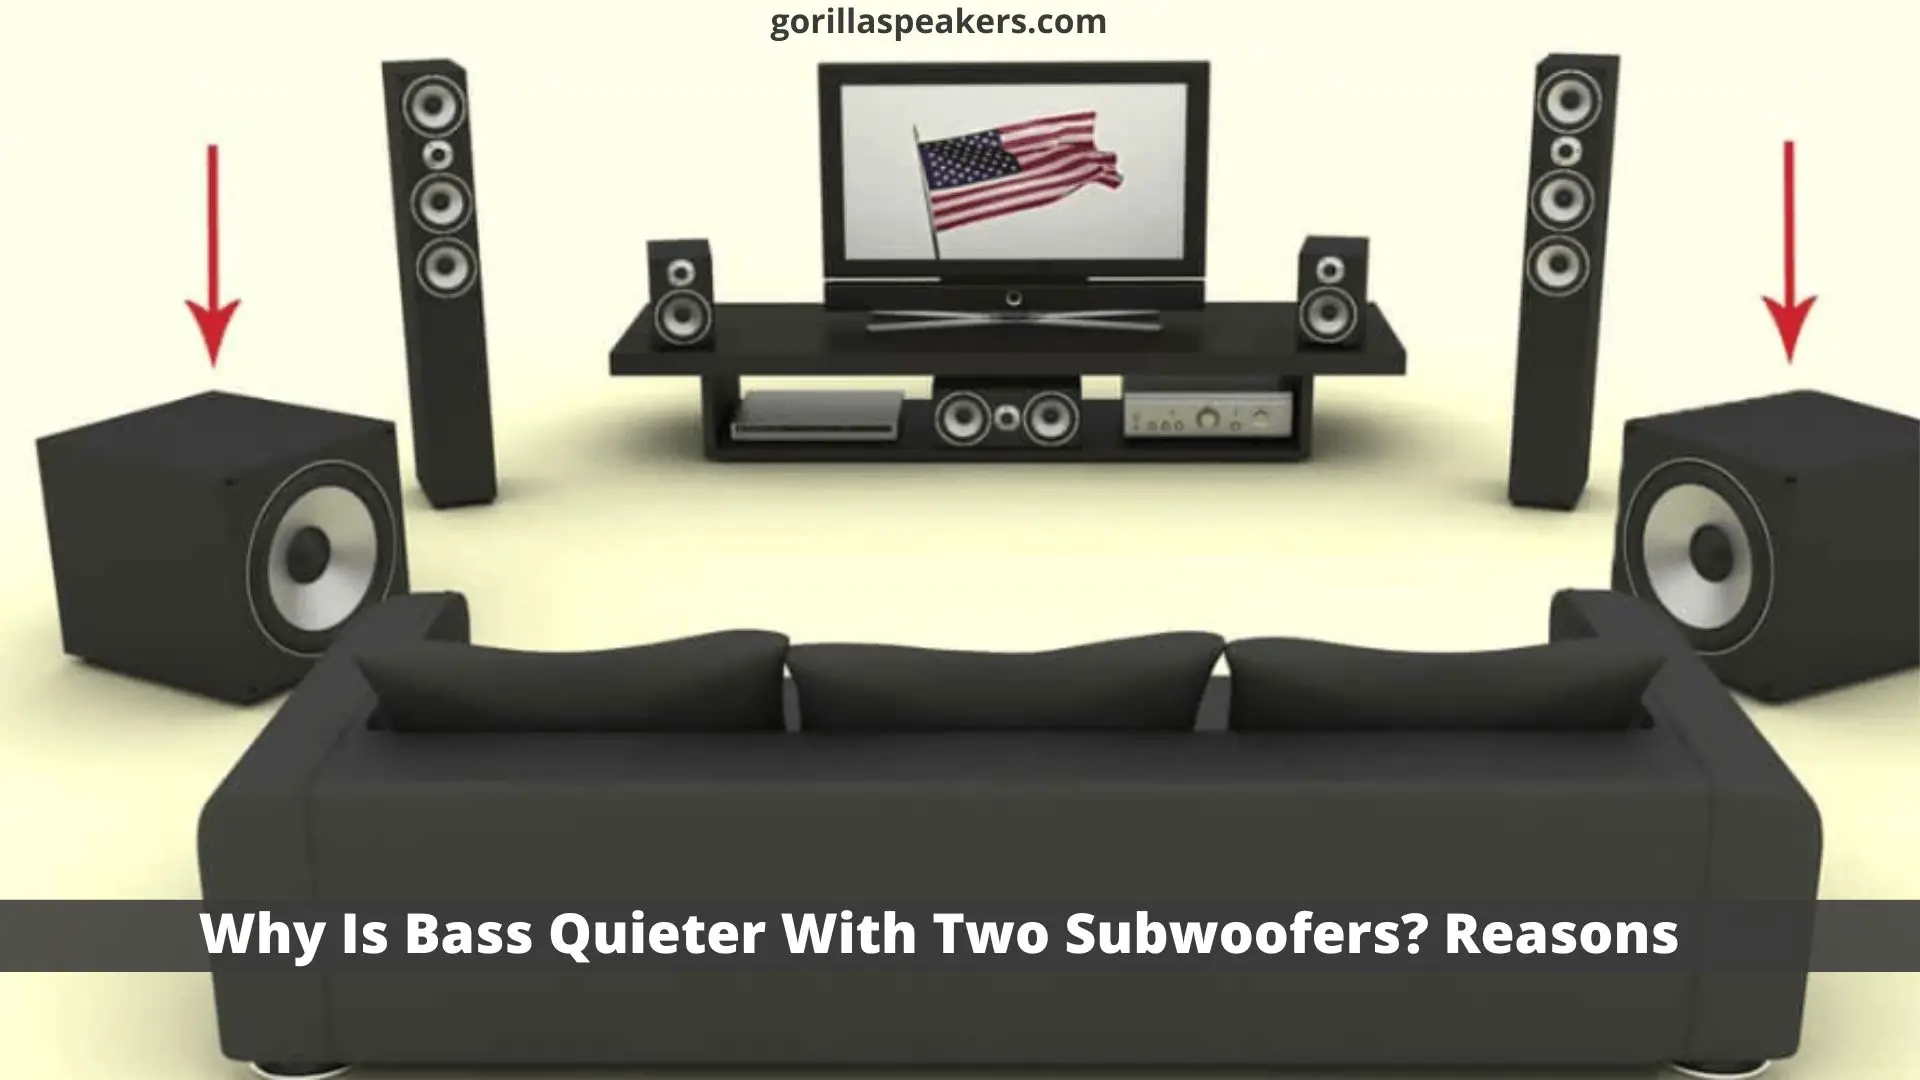 Why Is Bass Quieter With Two Subwoofers?